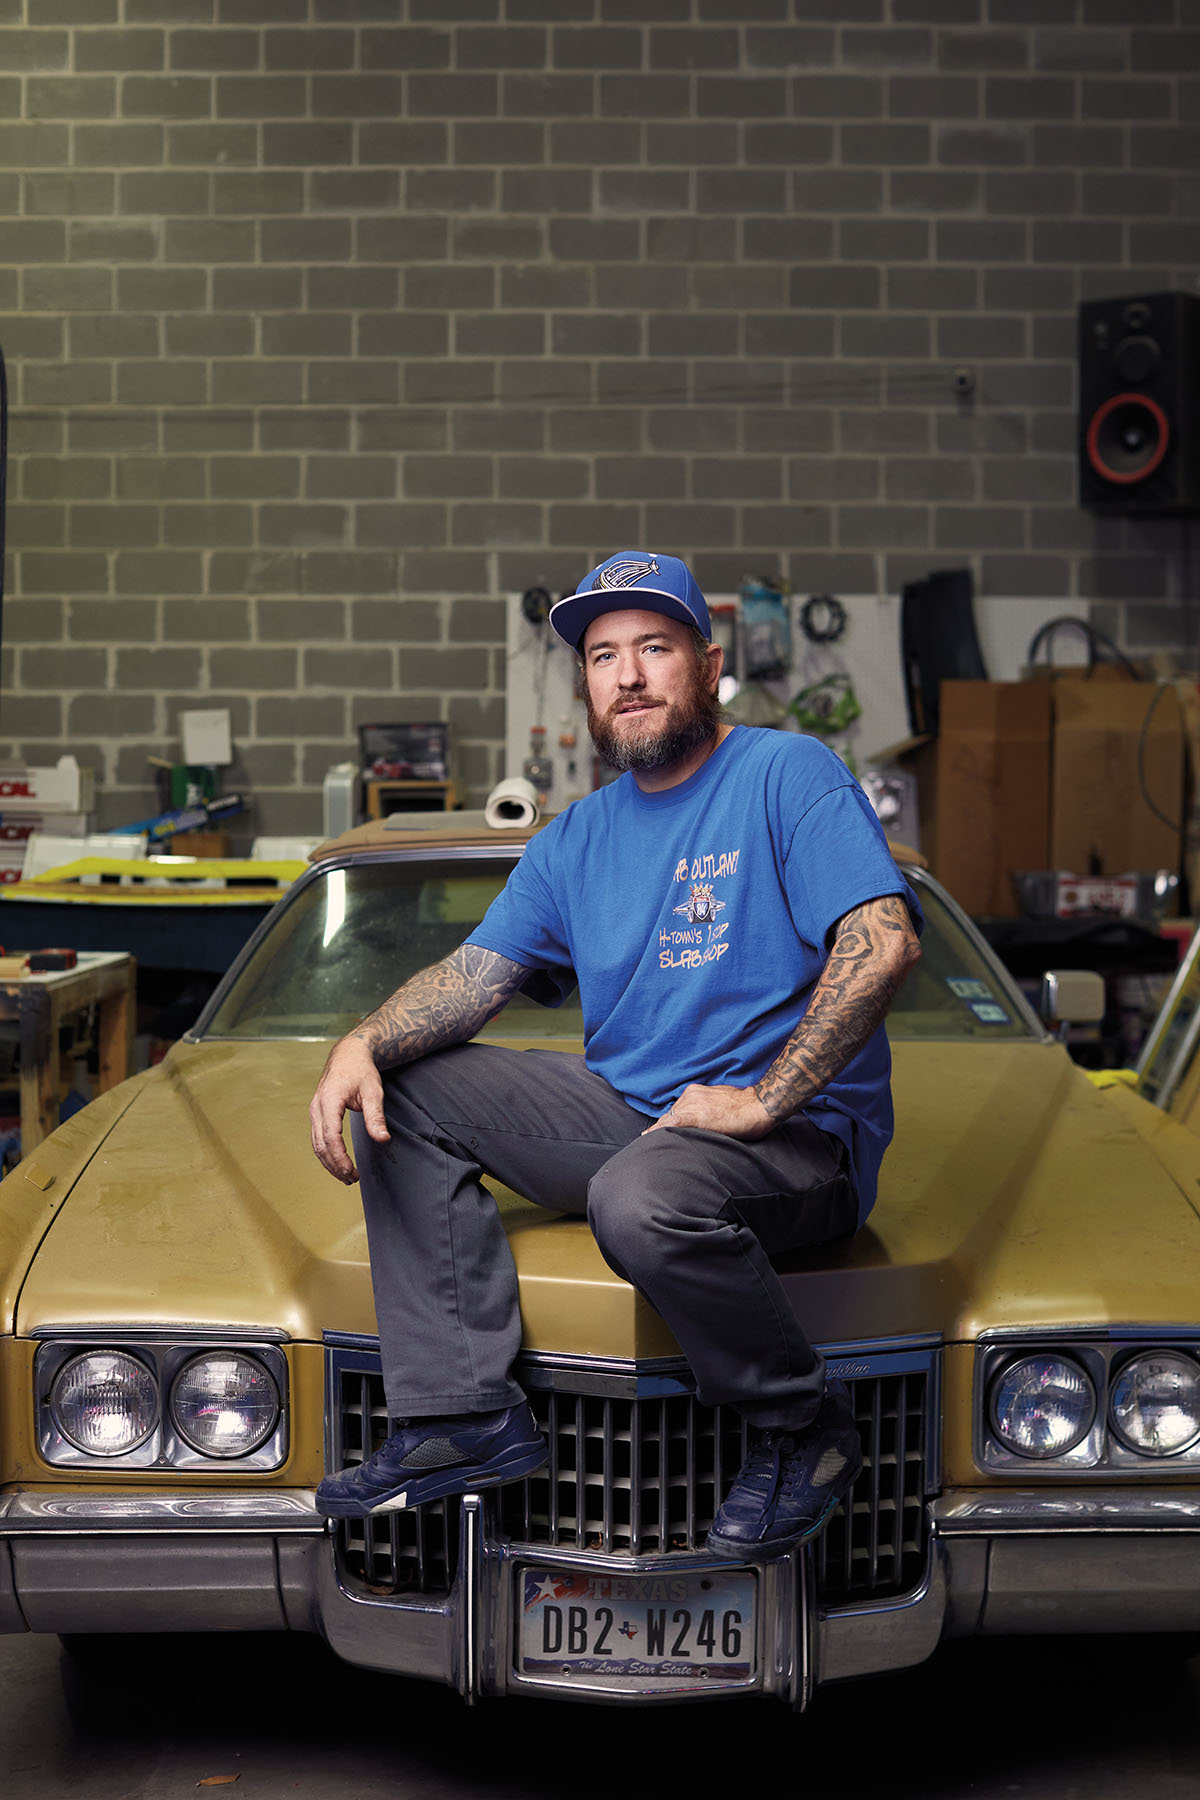 A man in a blue baseball cap and shirt sits on the hood of a mustard-yellow car